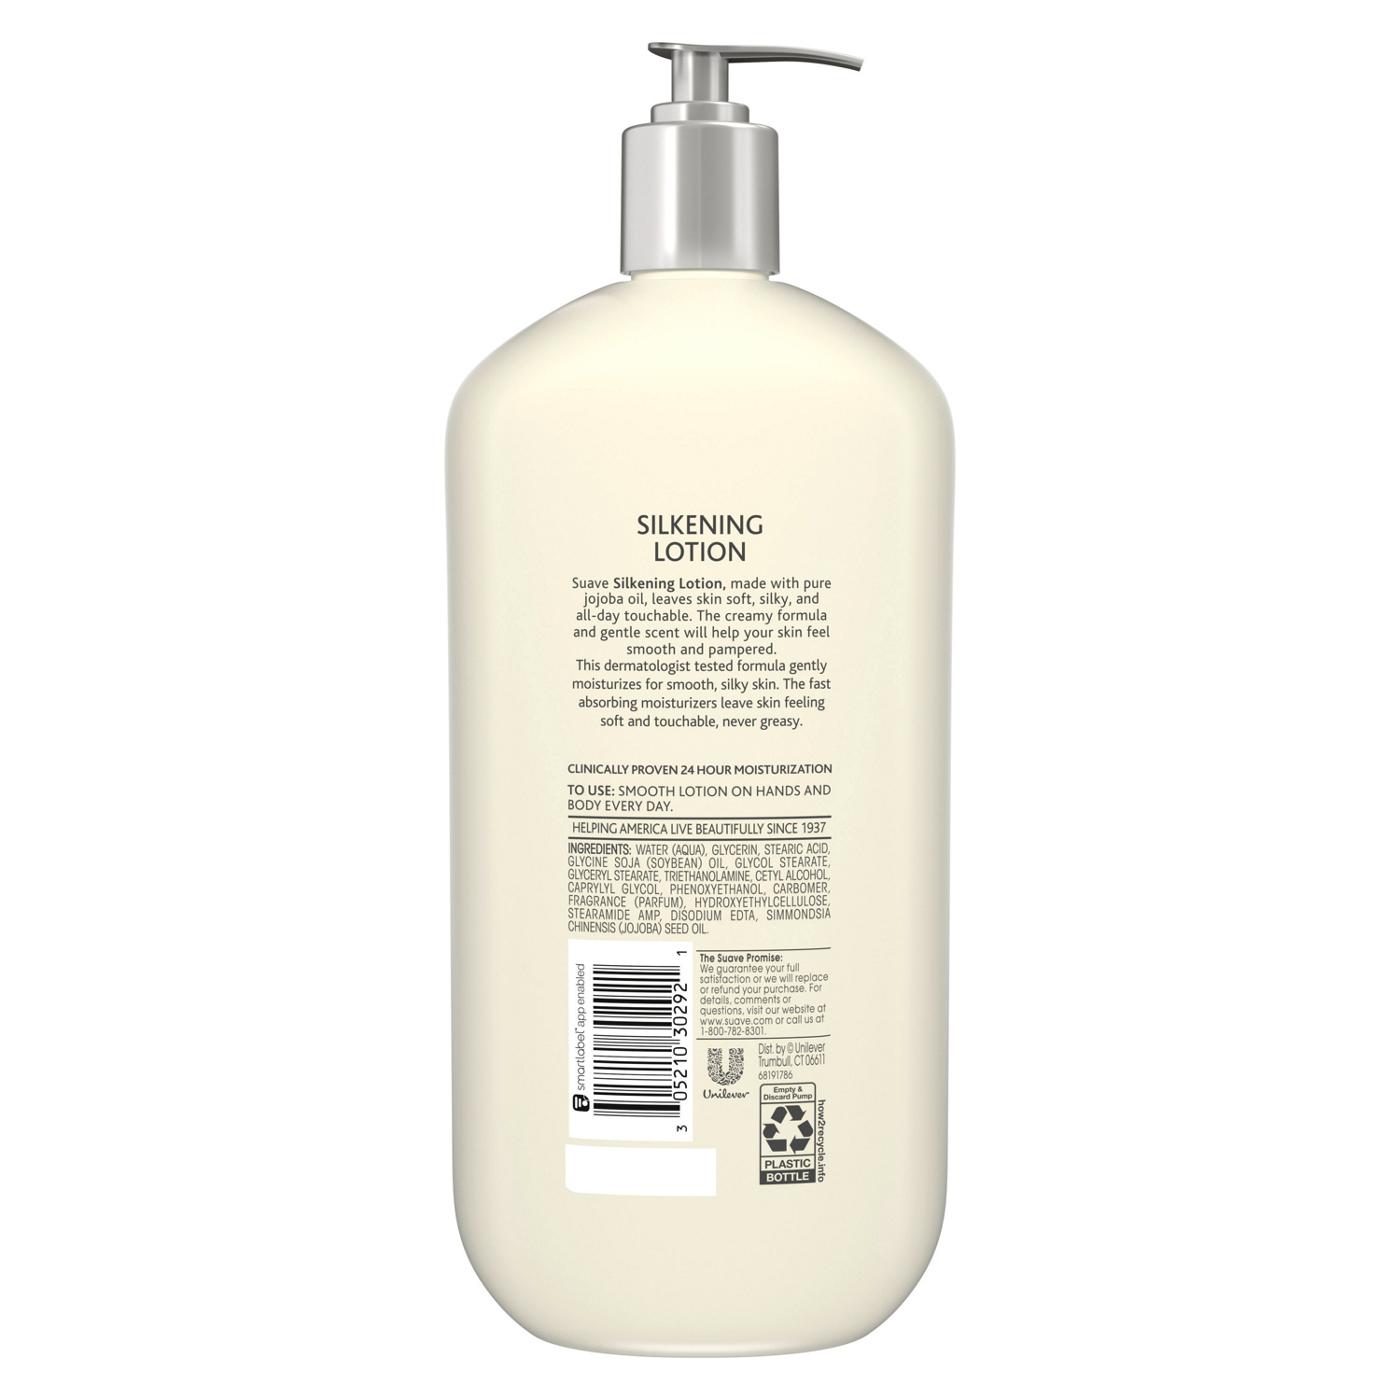 Suave Skin Solutions Advanced Therapy Body Lotion - Shop Body Lotion at  H-E-B